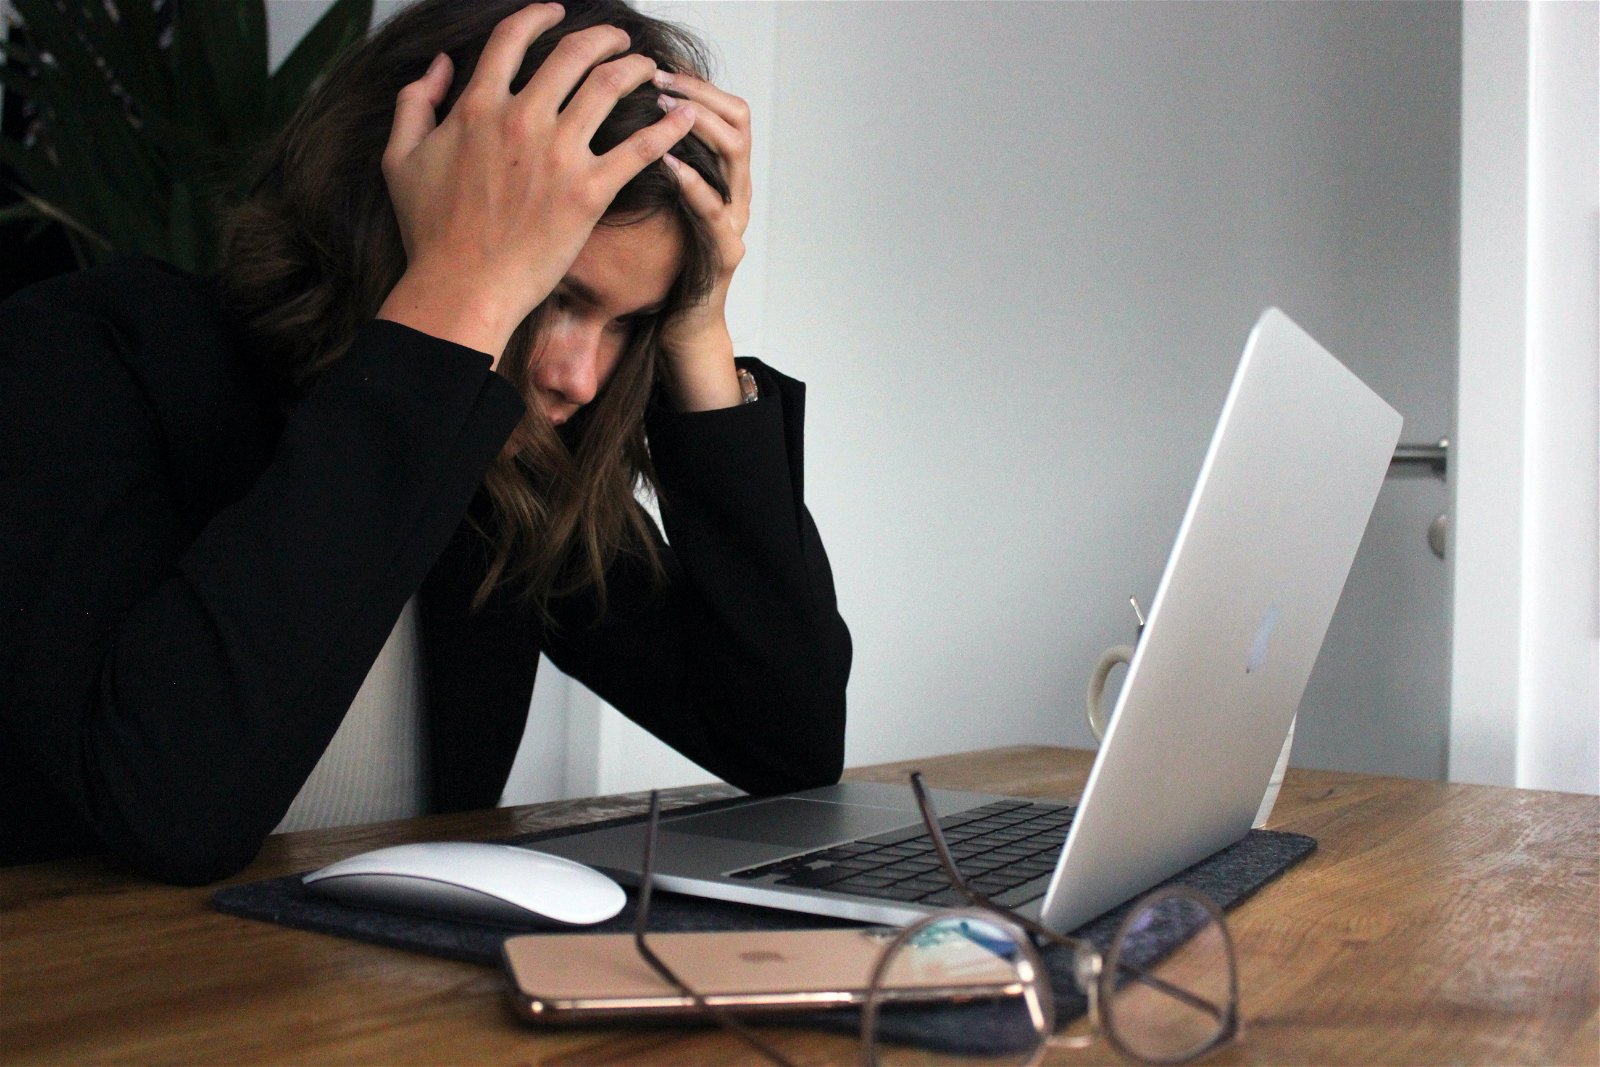 5 Ways to Deal with Stressful Work Environments